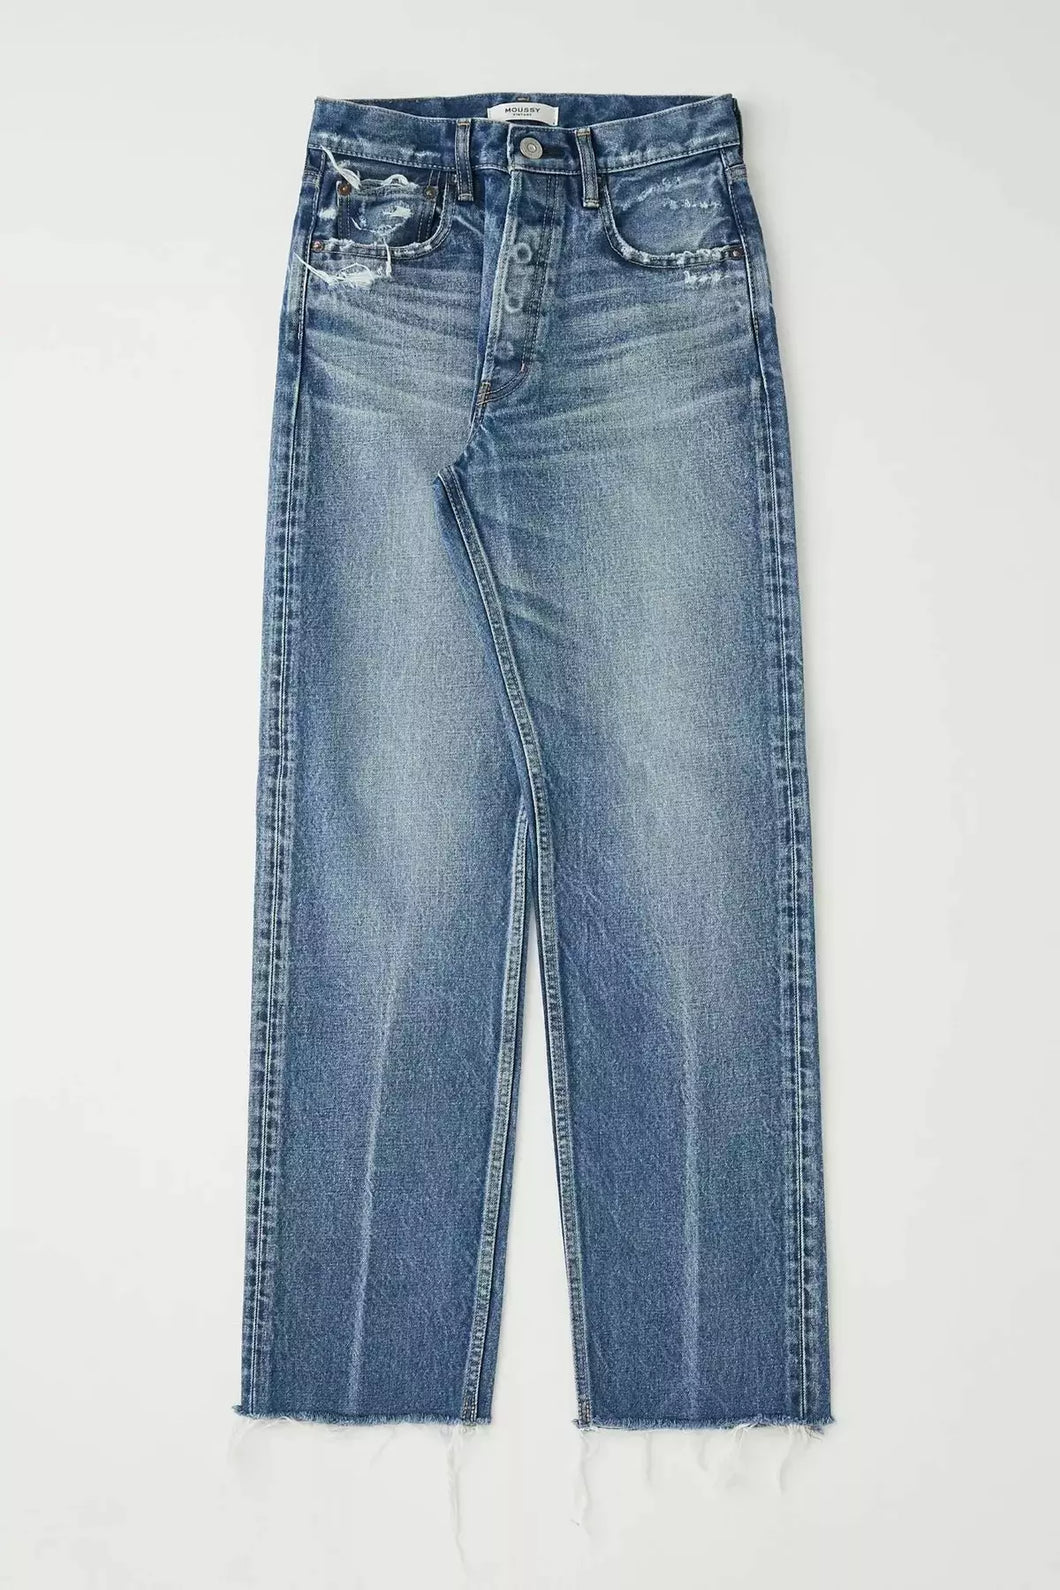 wide straight leg jeans by moussy at west2westport.com